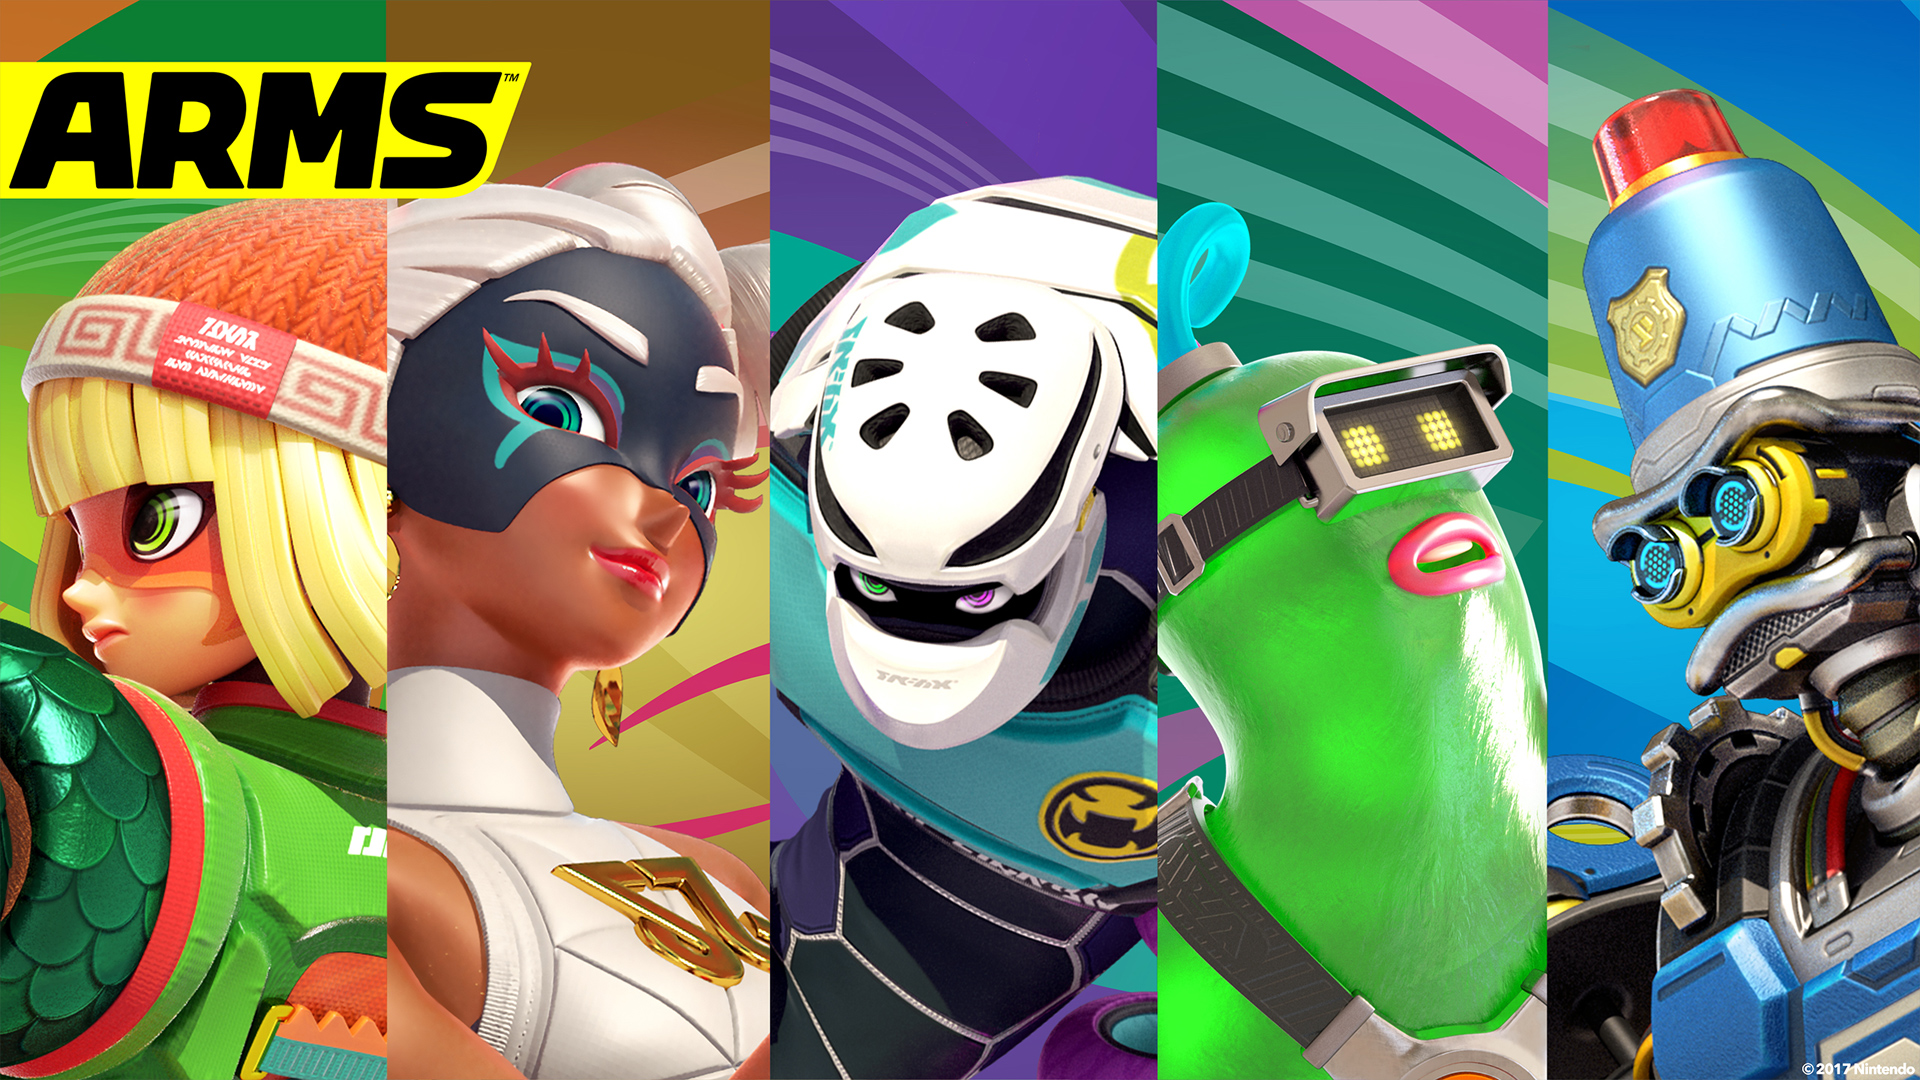 Characters from Arms. Wallpaper from Arms